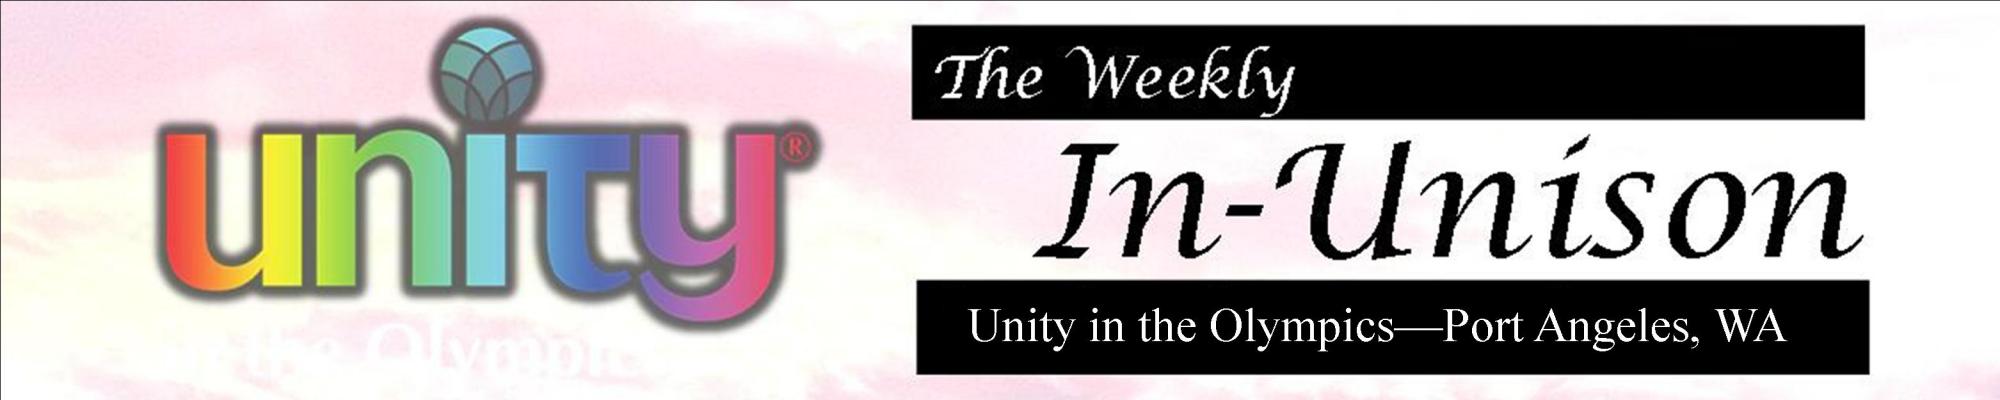 The Weekly IN-UNISON February 14, 2024 Edition